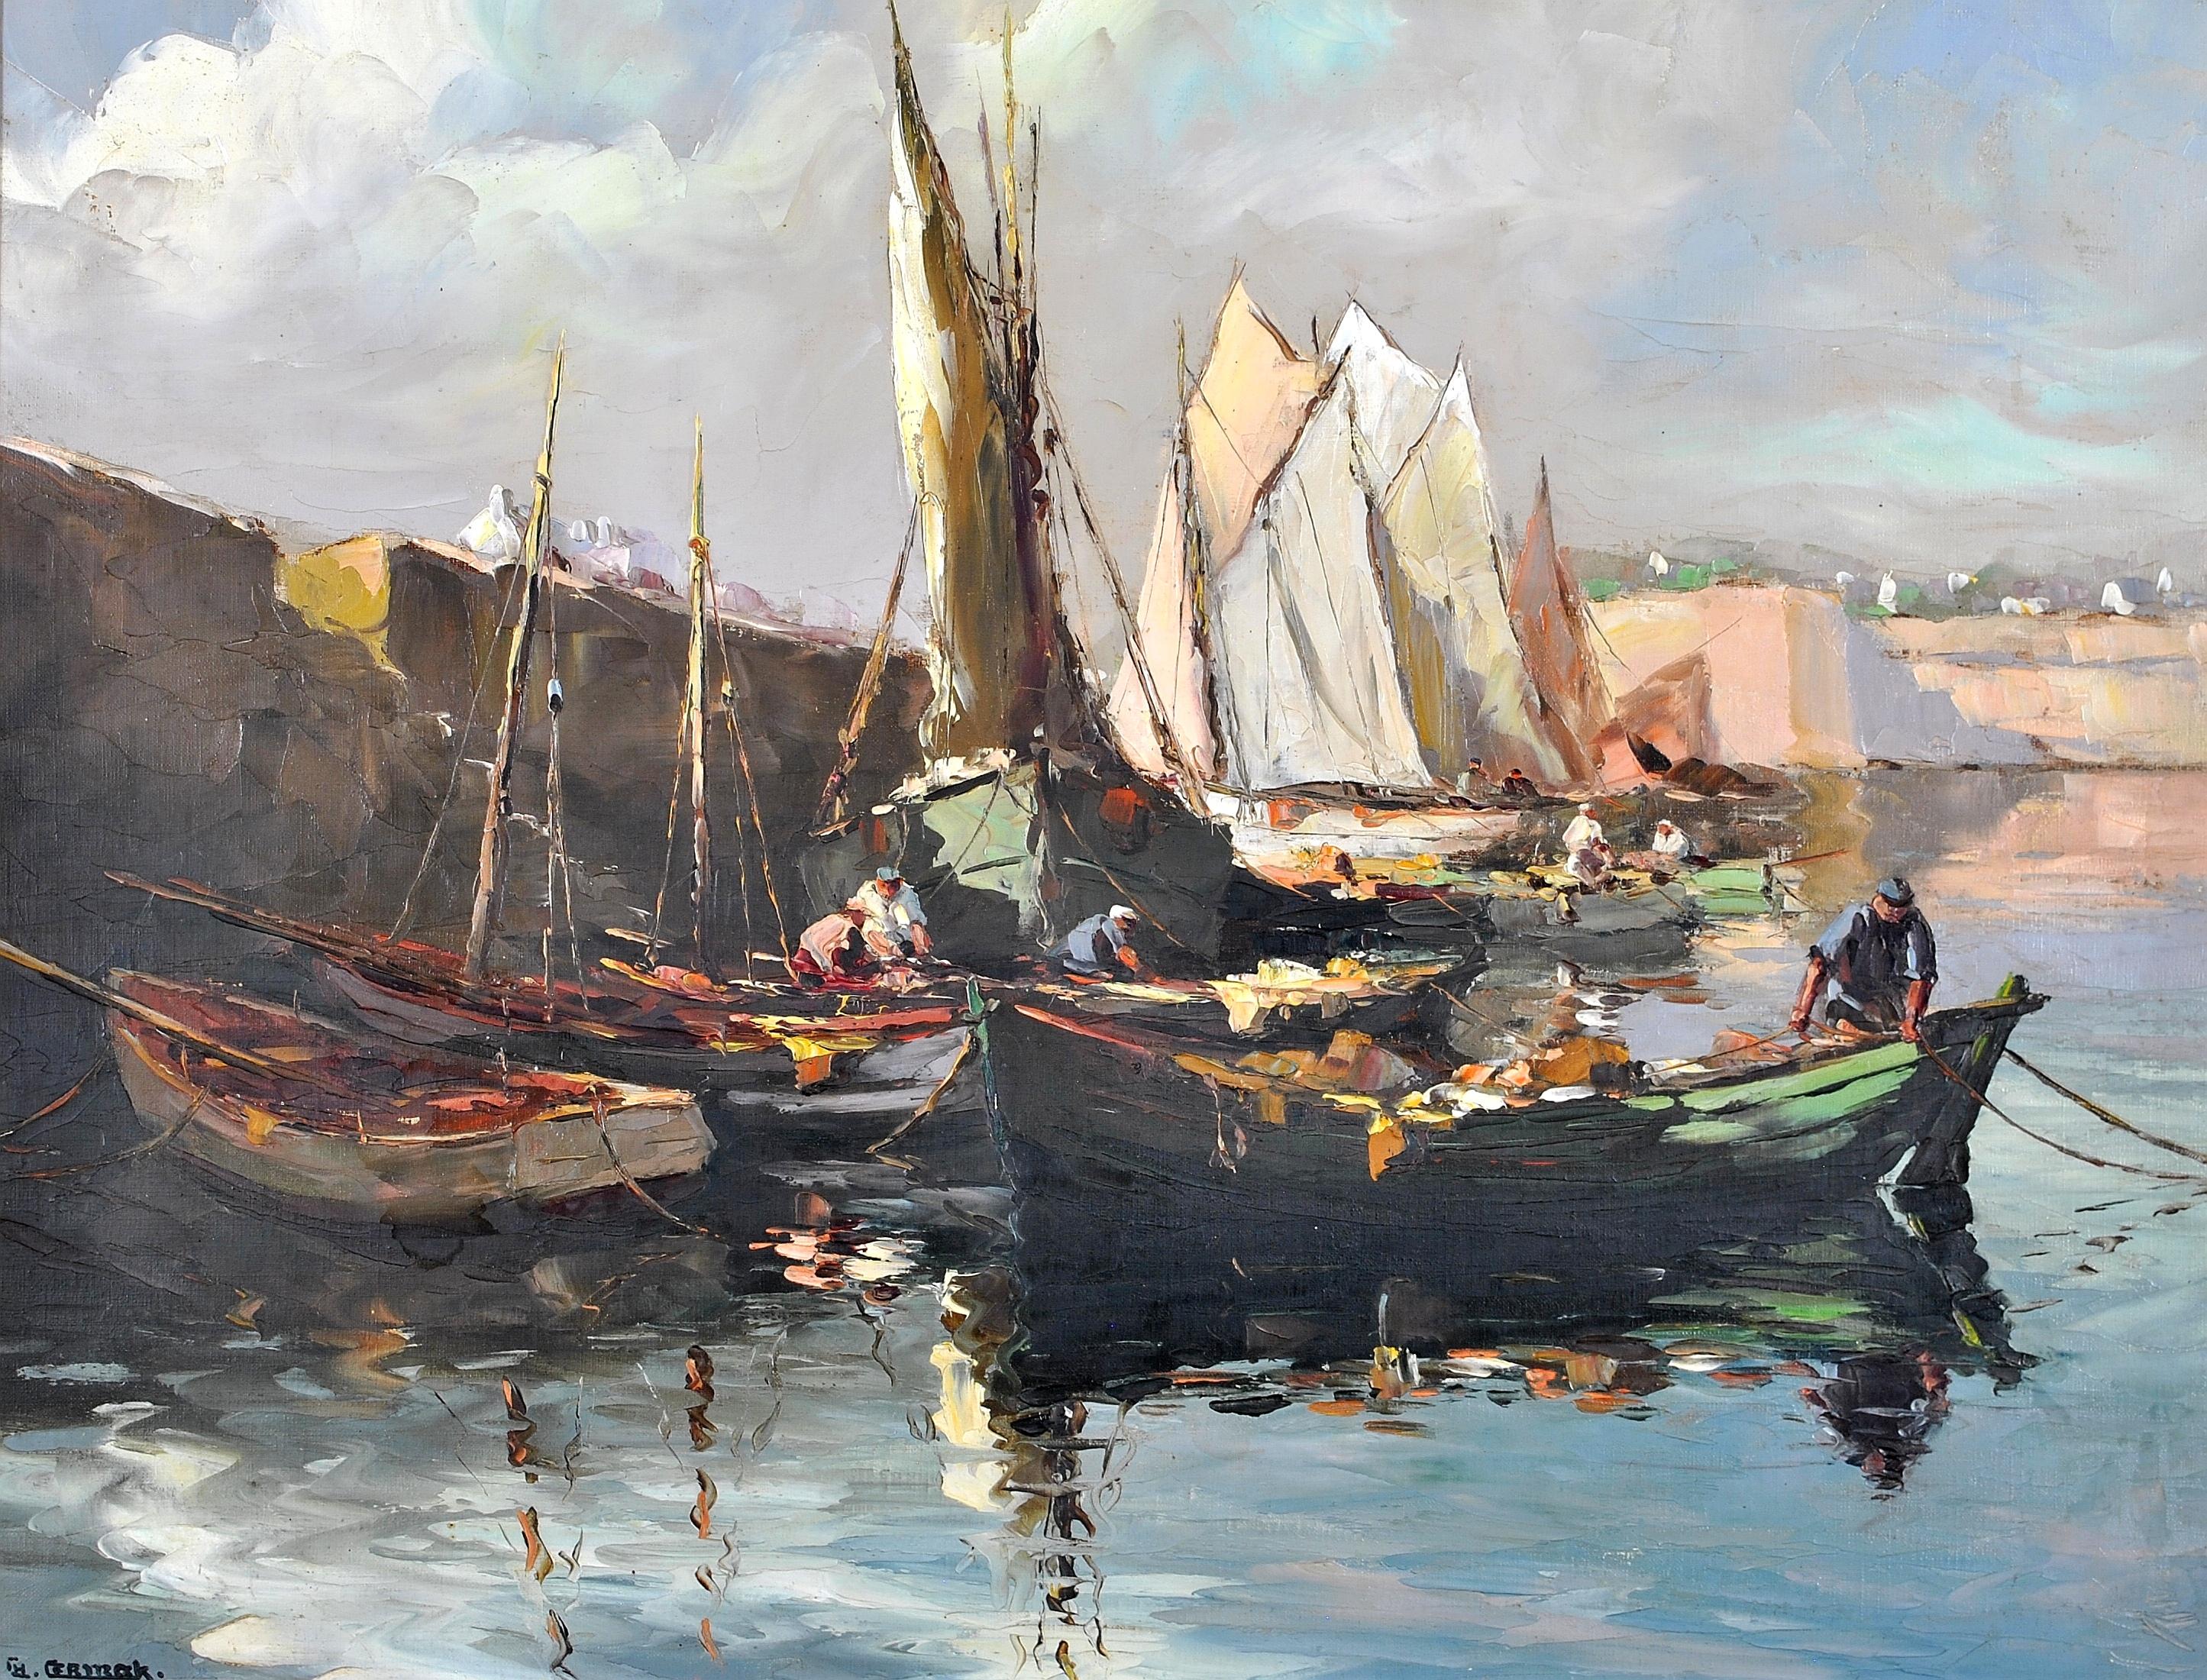 This beautiful large impressionist oil on canvas by French artist Charles Cermak was painted in the 1930's. The work depicts colourful sailing boats in a harbor on the Côte d'Azur, most likely close to Saint-Tropez, where the artist lived and